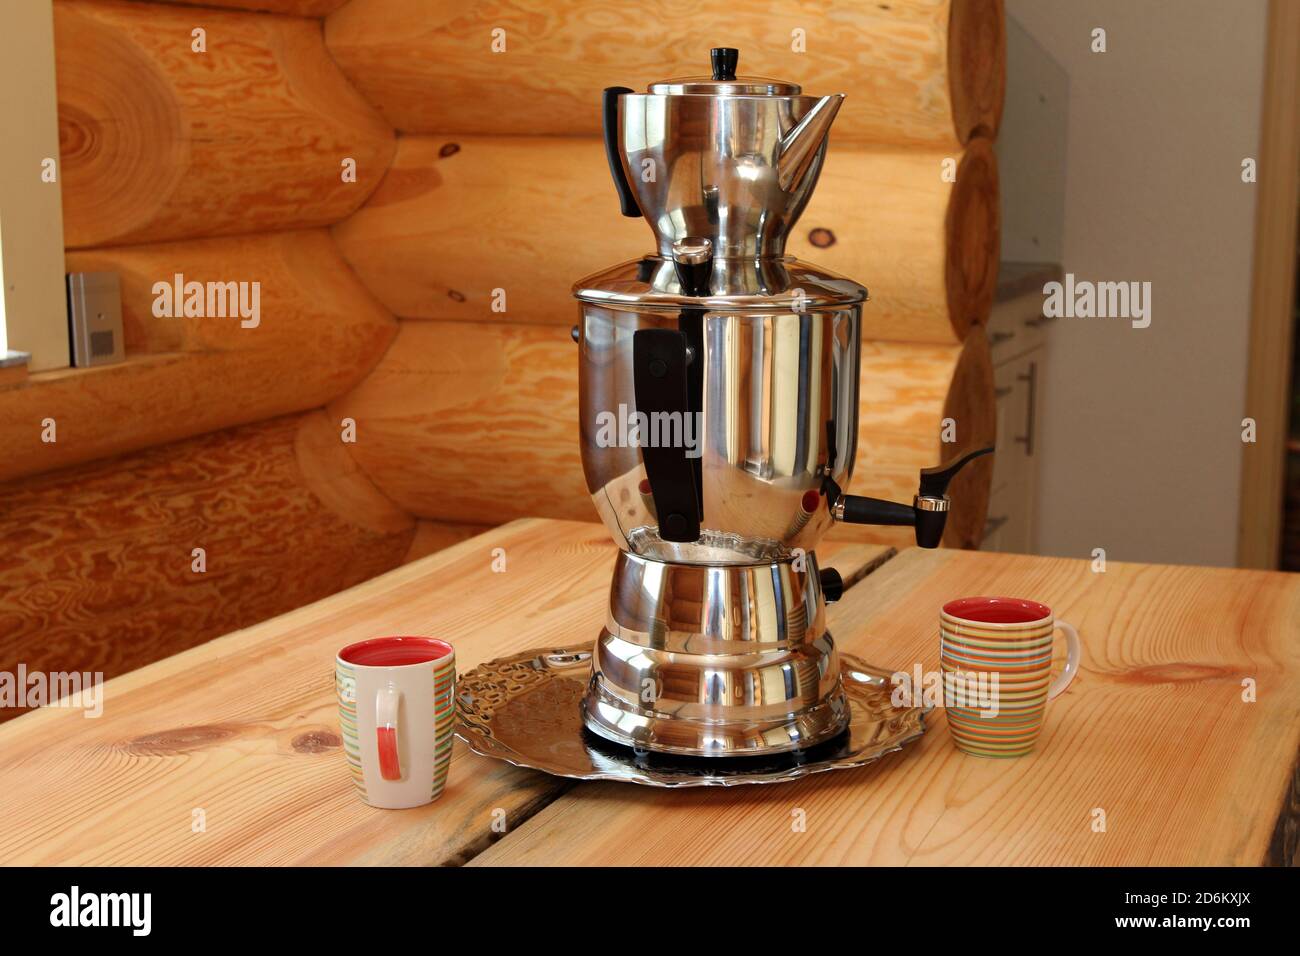 Alamy photography stock samovar - images hi-res Vintage and